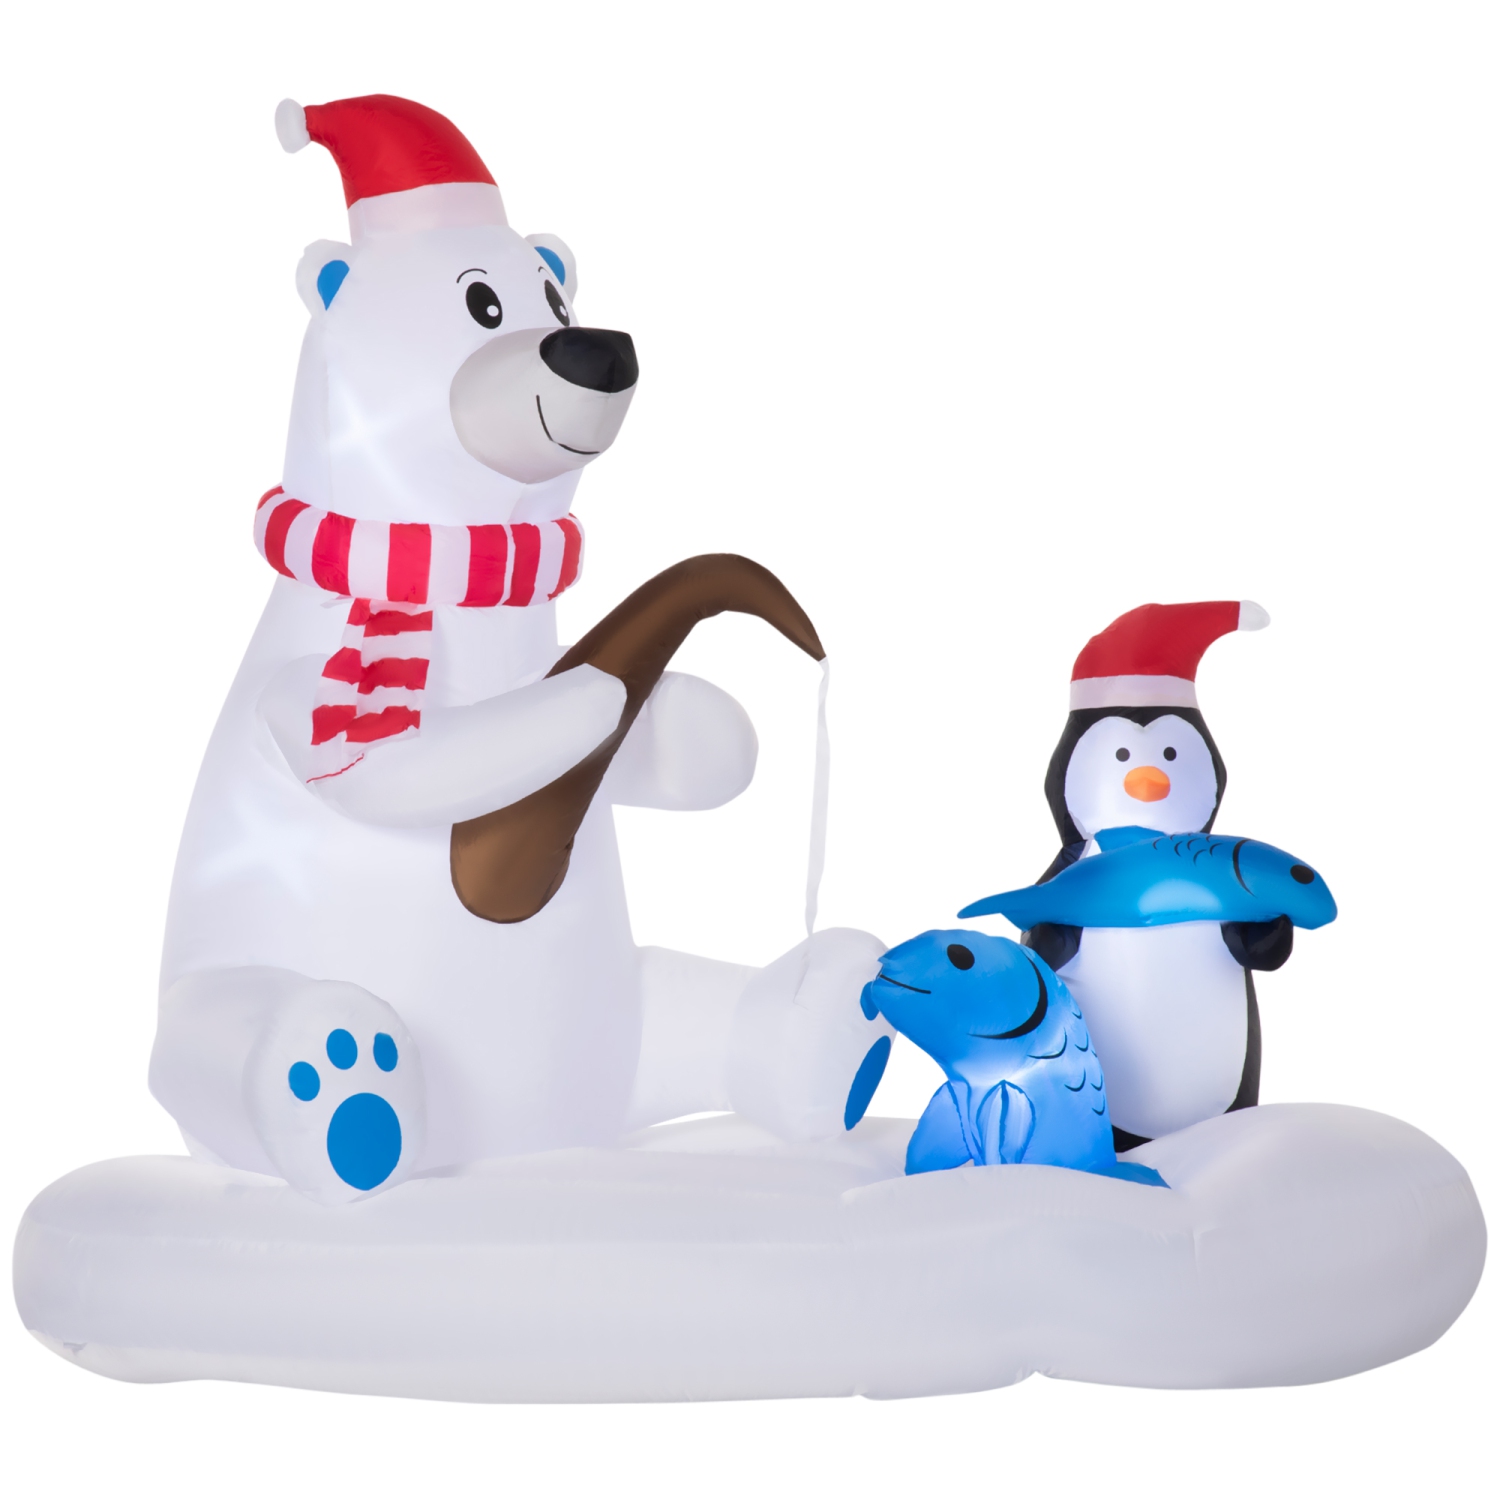 Outsunny 6ft Inflatable Christmas Polar Bear Wearing a Santa Hat with His Penguin Fishing companion on Board, Blow-Up Outdoor LED Yard Display for Lawn Garden Party